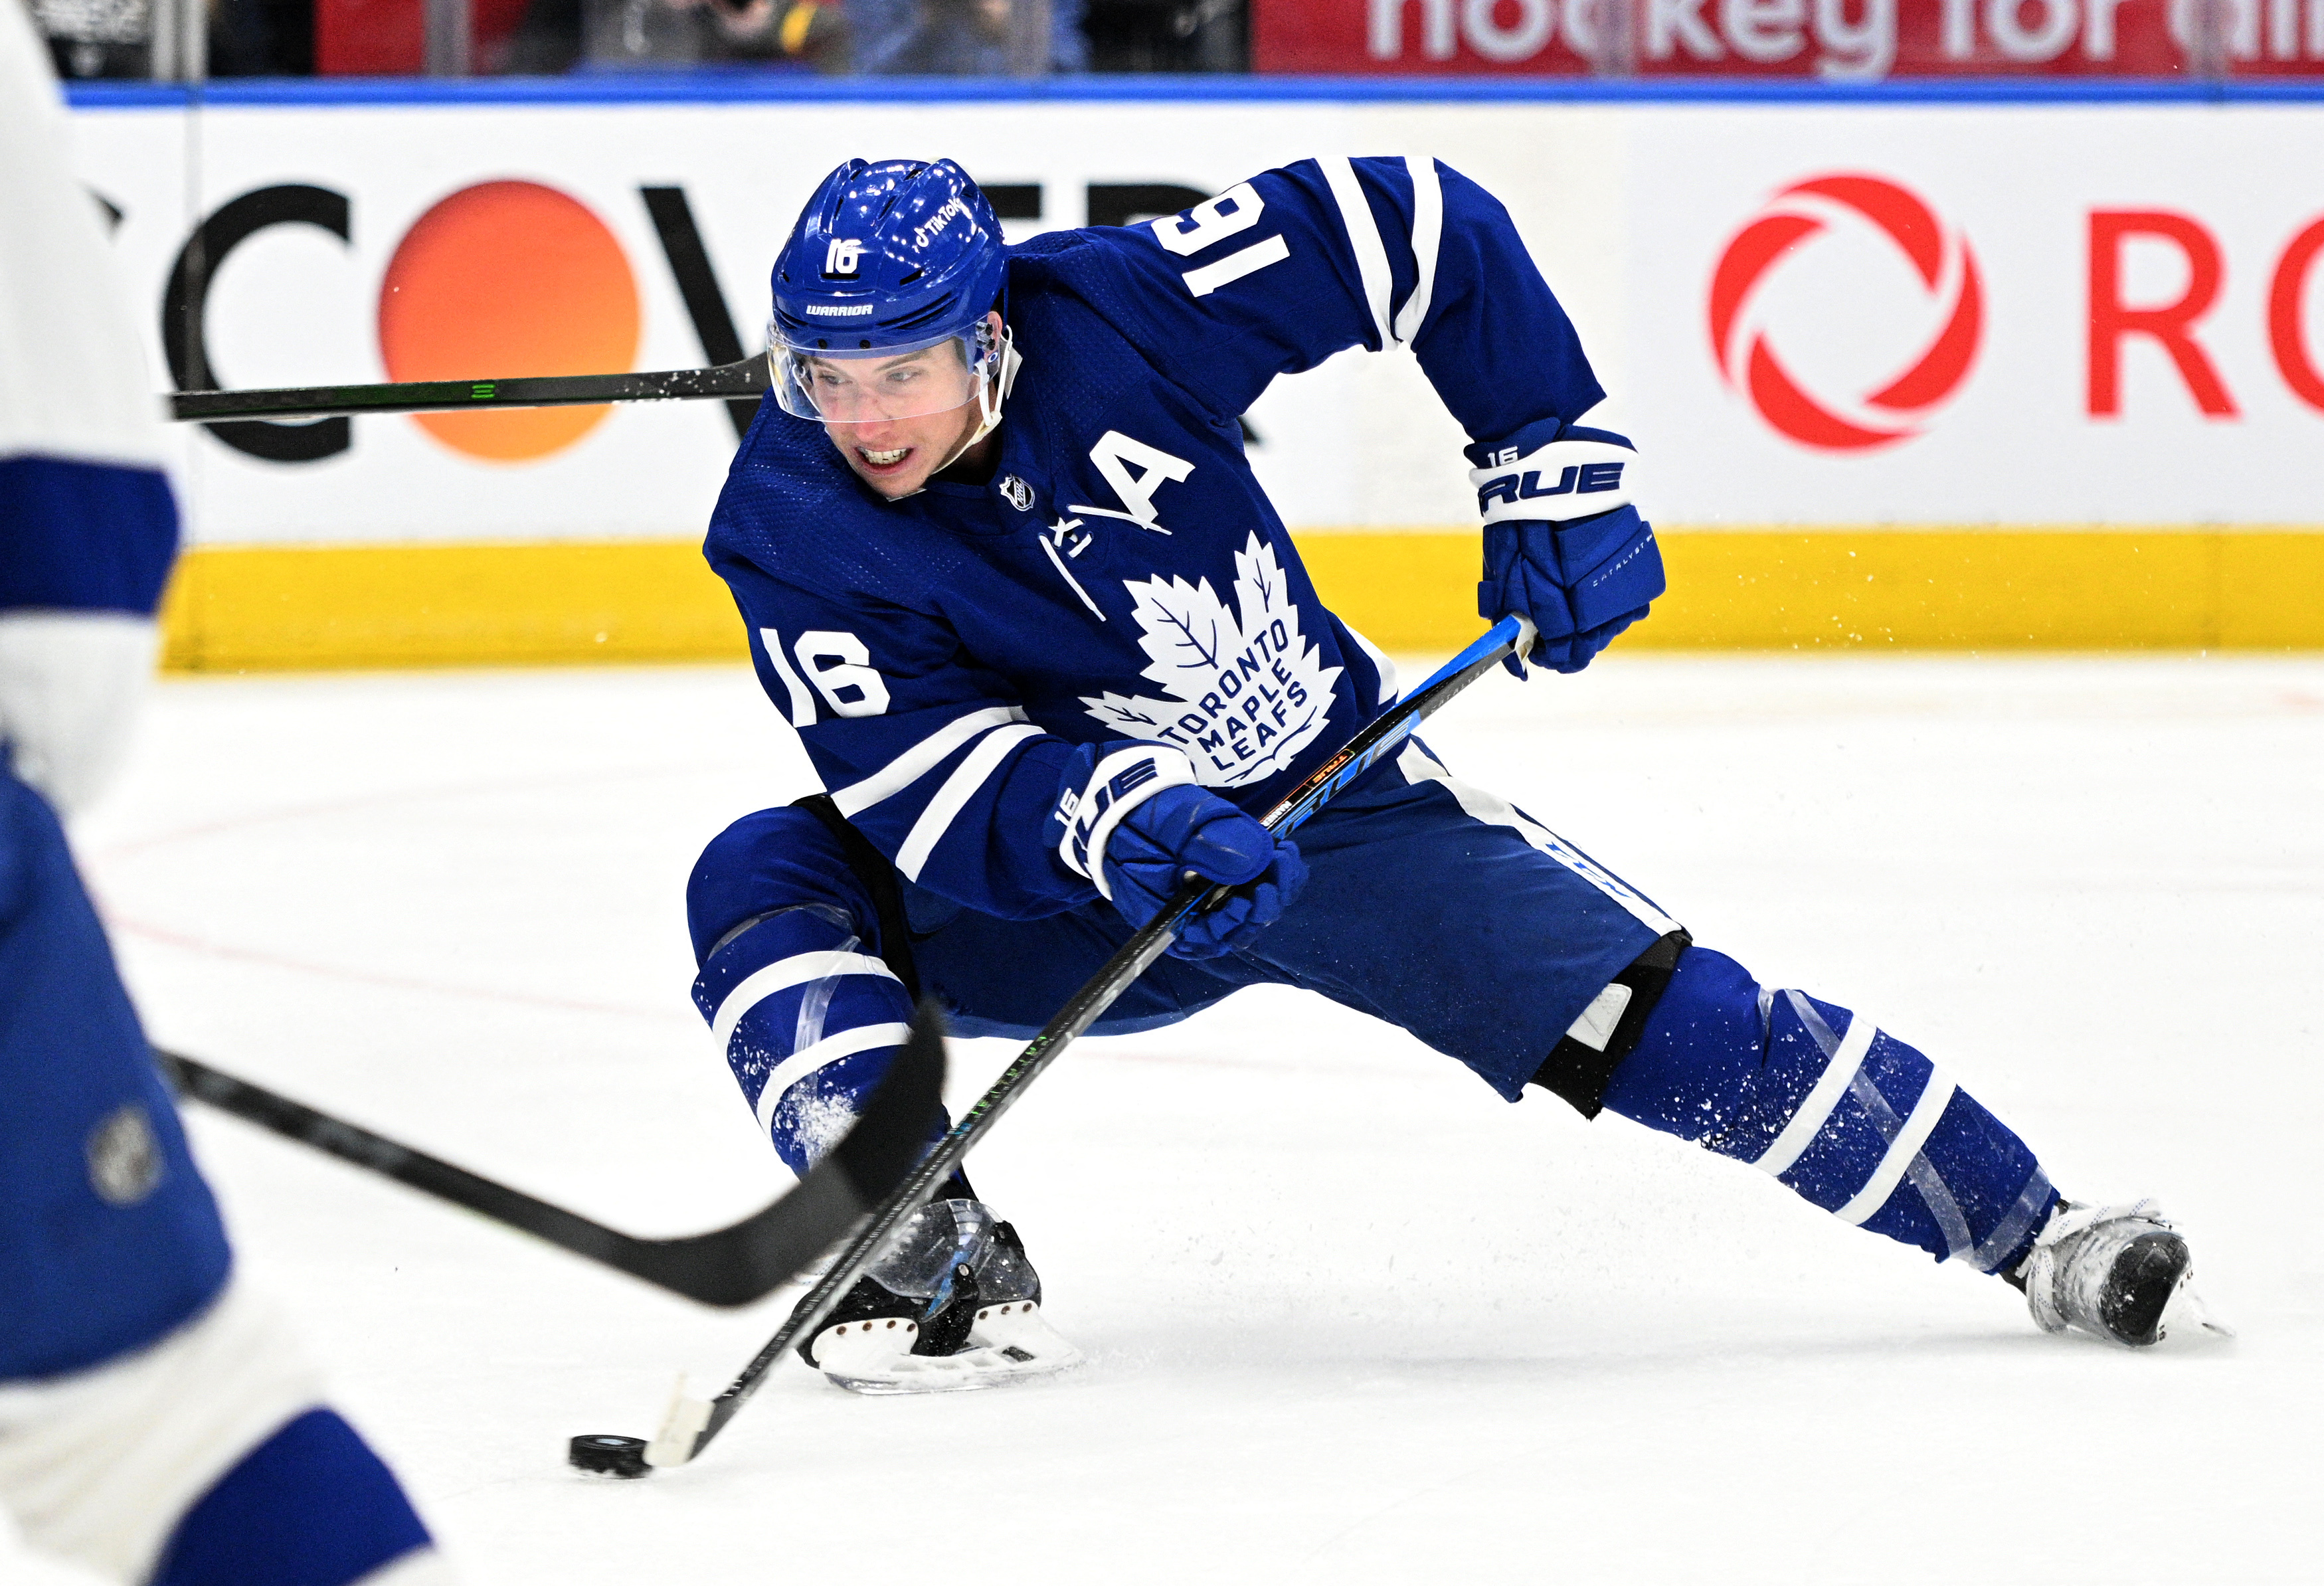 Leafs' Kyle Clifford to miss Game 2 against Lightning for boarding